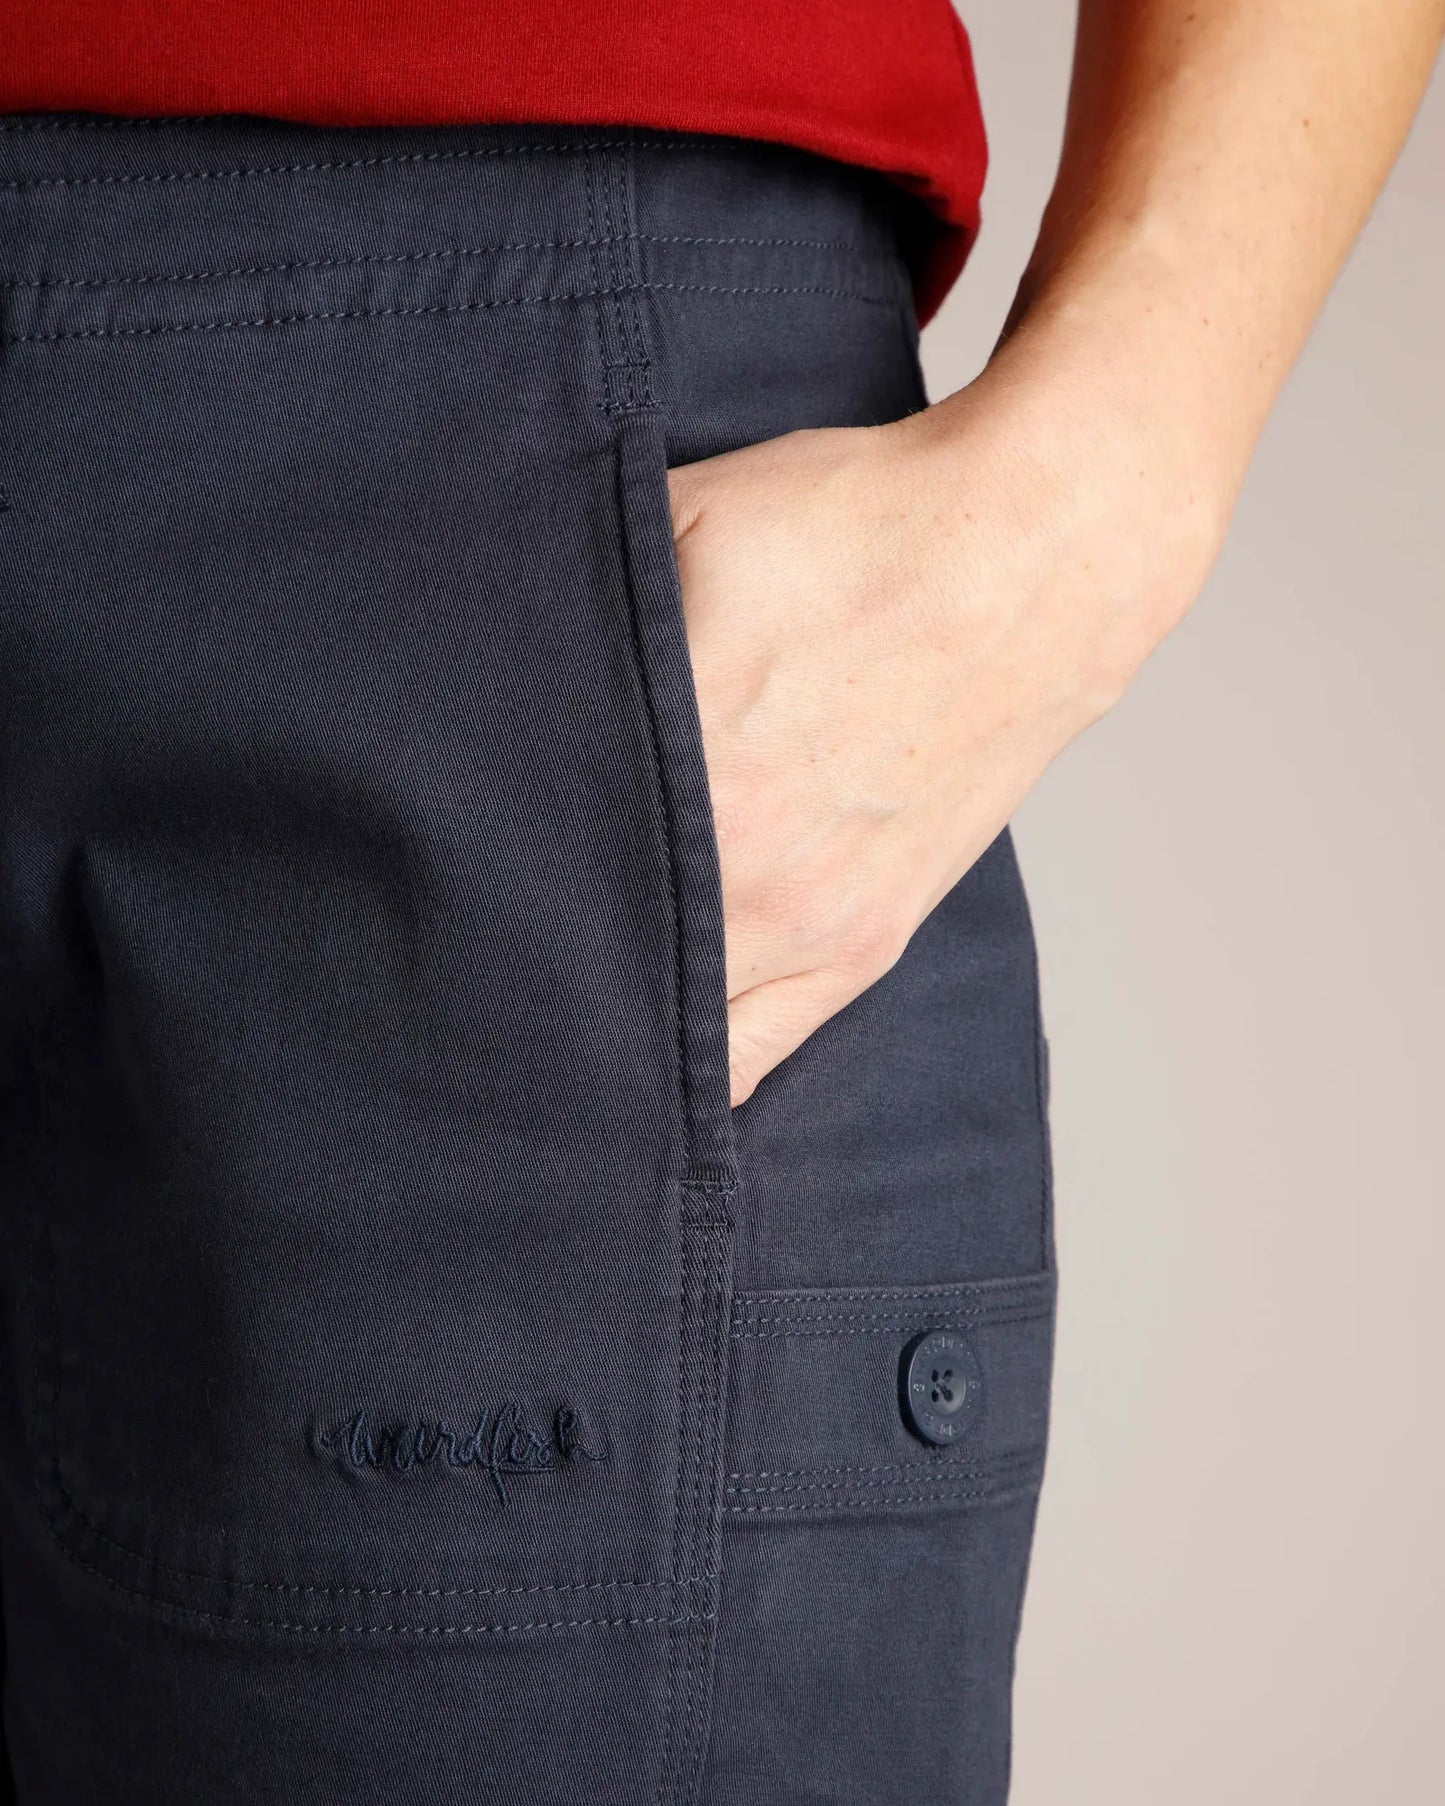 Willoughby Shorts - Navy